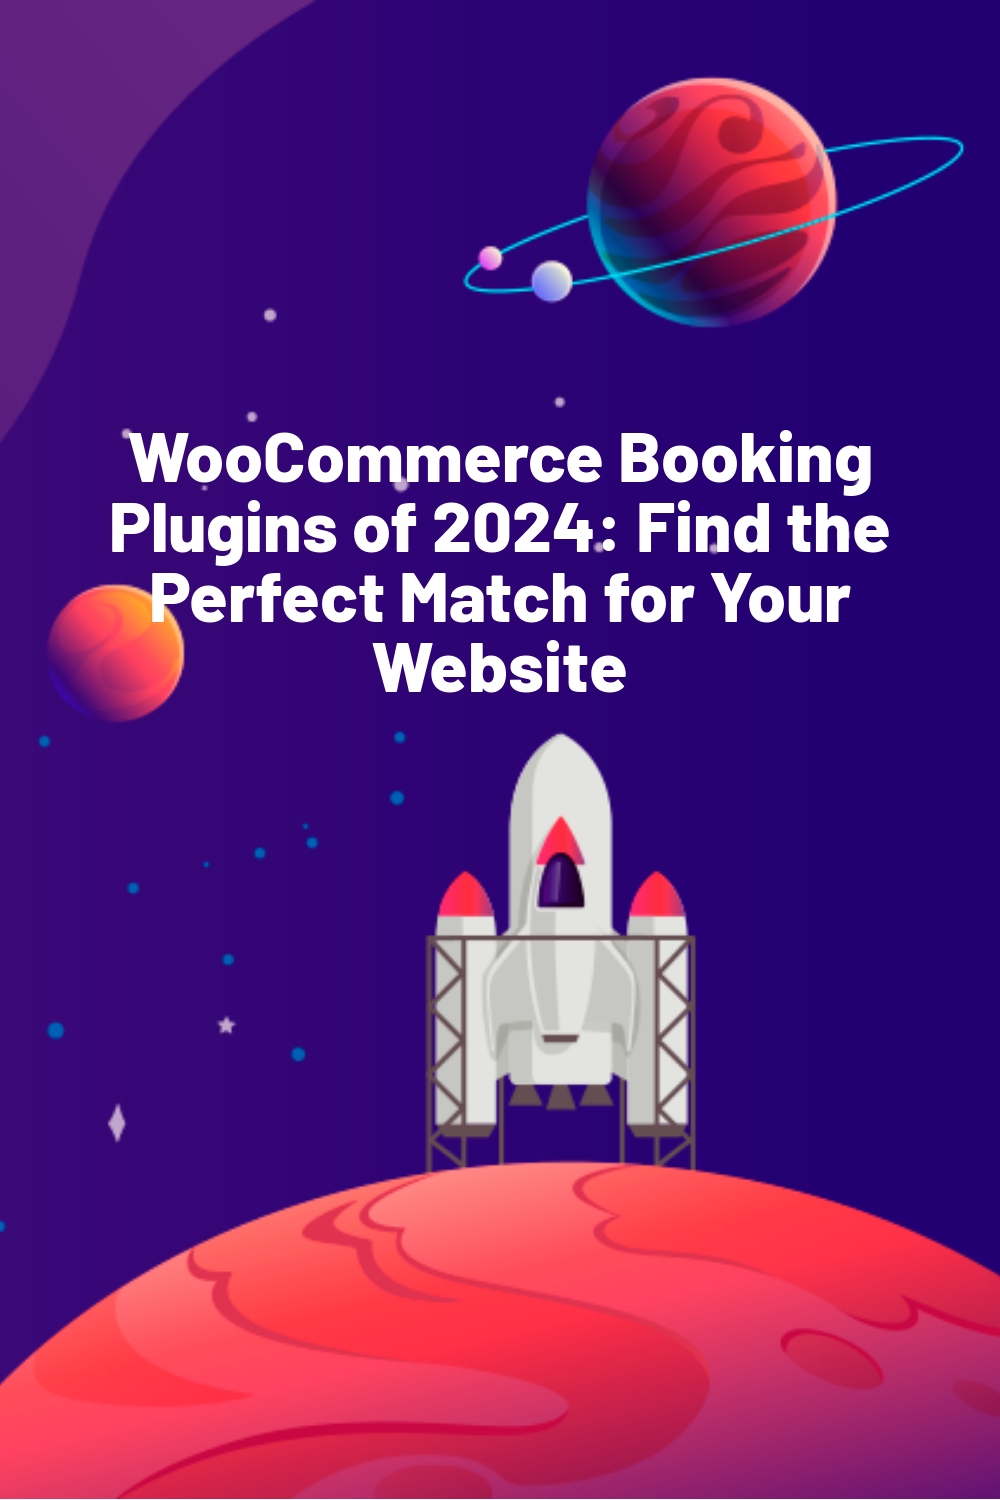 WooCommerce Booking Plugins of 2024: Find the Perfect Match for Your Website